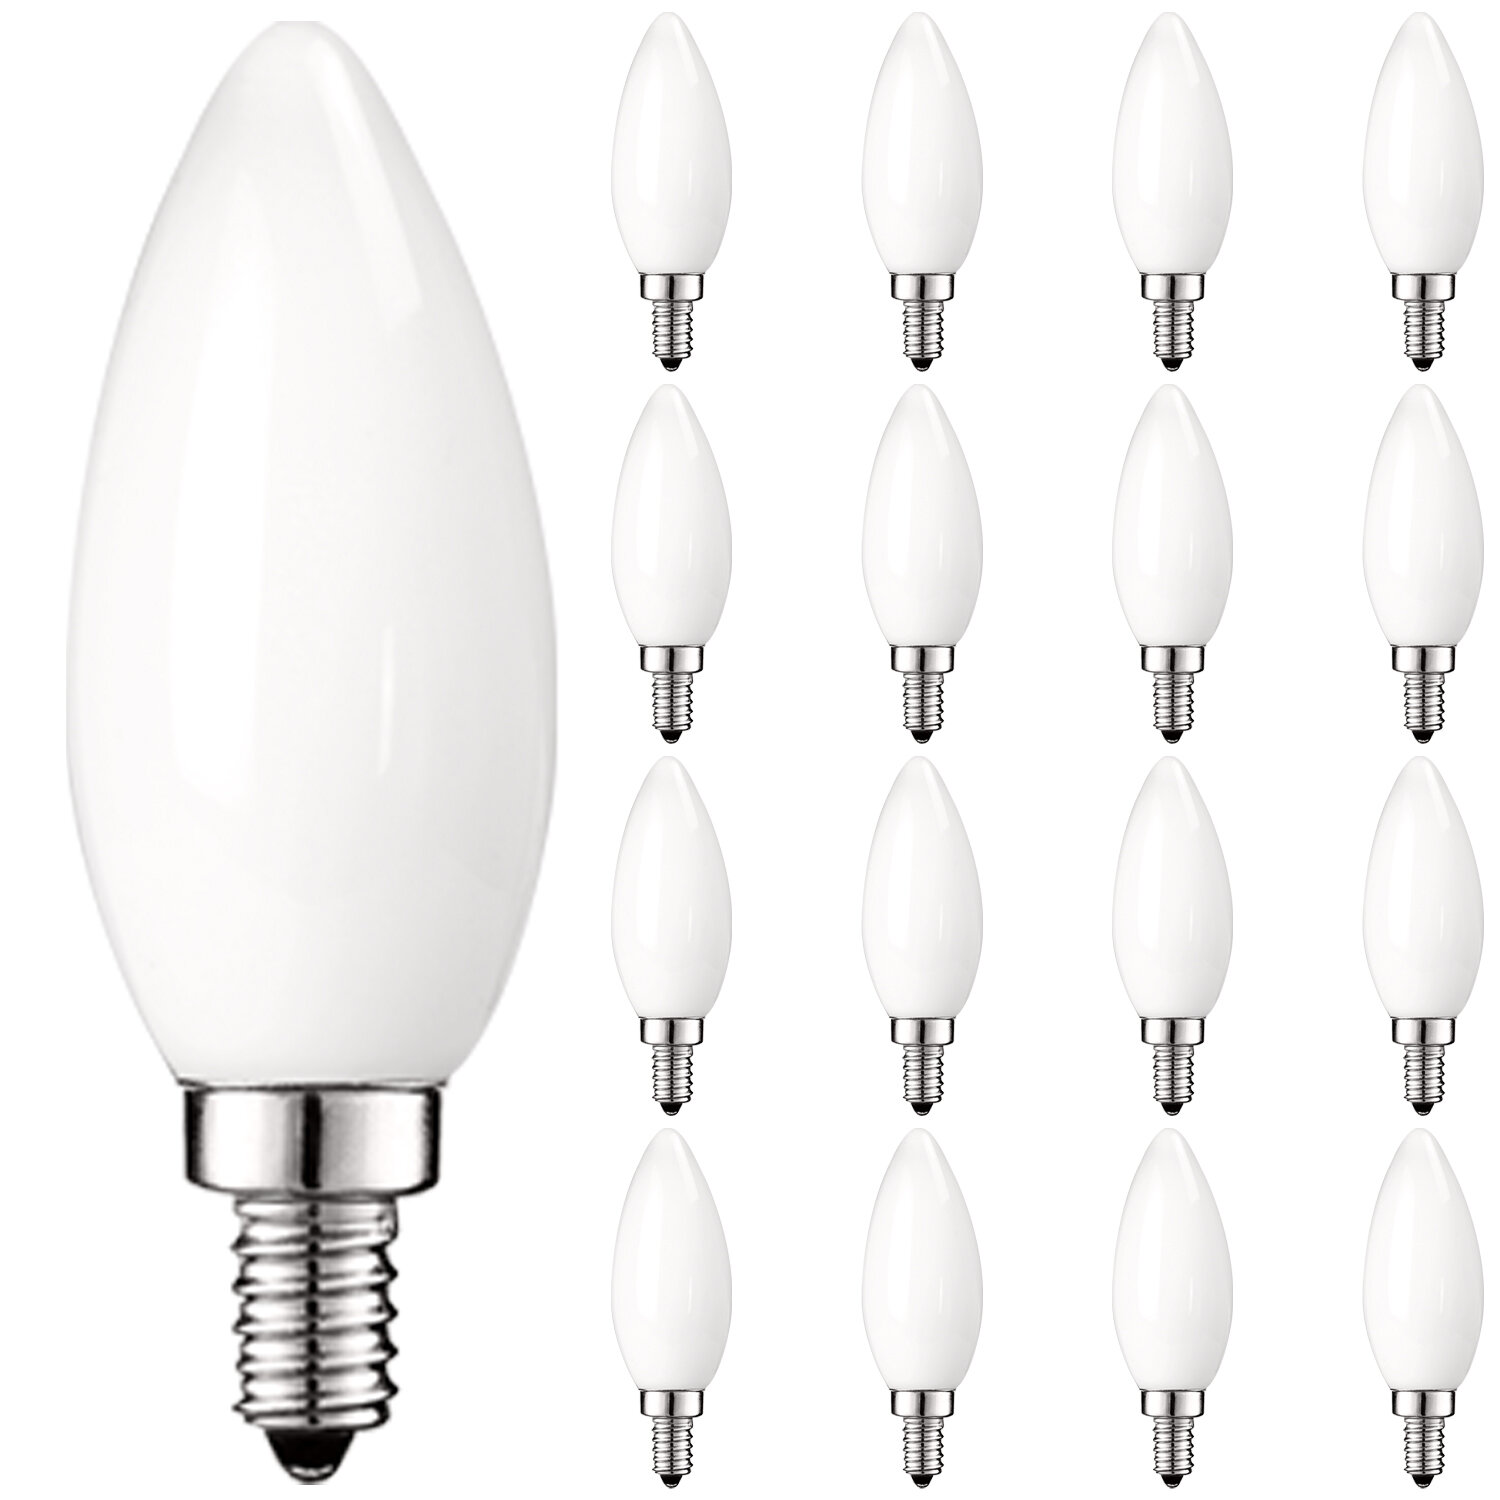 Wet Rated MaxLite Candelabra LED Chandelier Bulbs E12 Base Dimmable Filament Candle Bulbs 6-Pack 40W Equivalent 2700K Soft White 300 Lumens Enclosed Fixture Rated Energy Star 